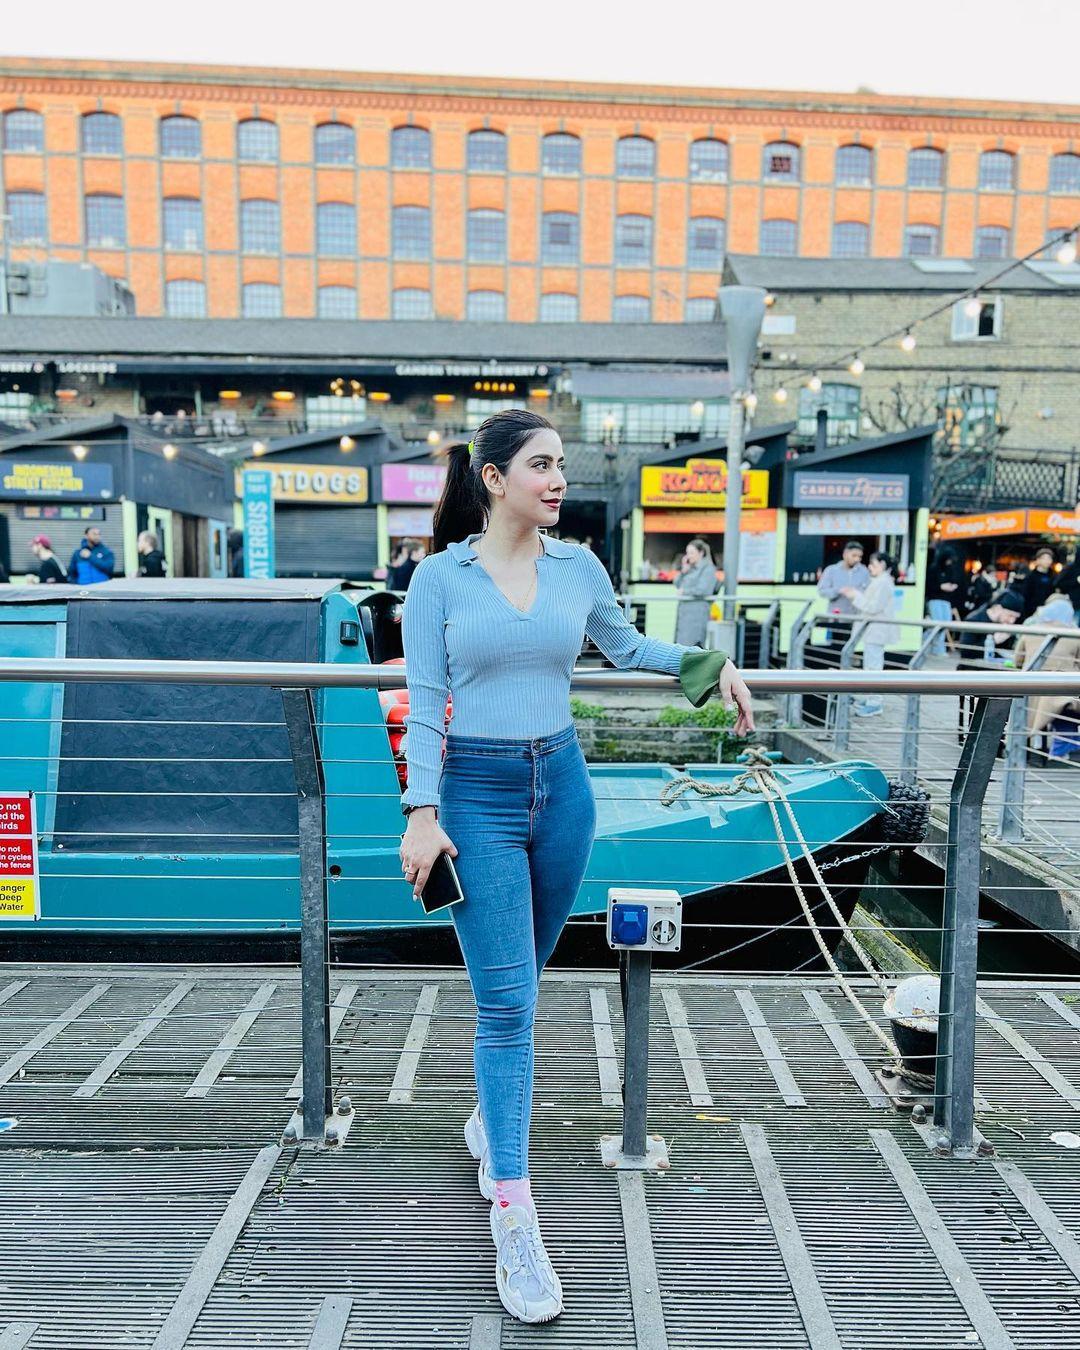 We take photos as a return ticket to a moment otherwise gone – Katie #CamdenMarket #London